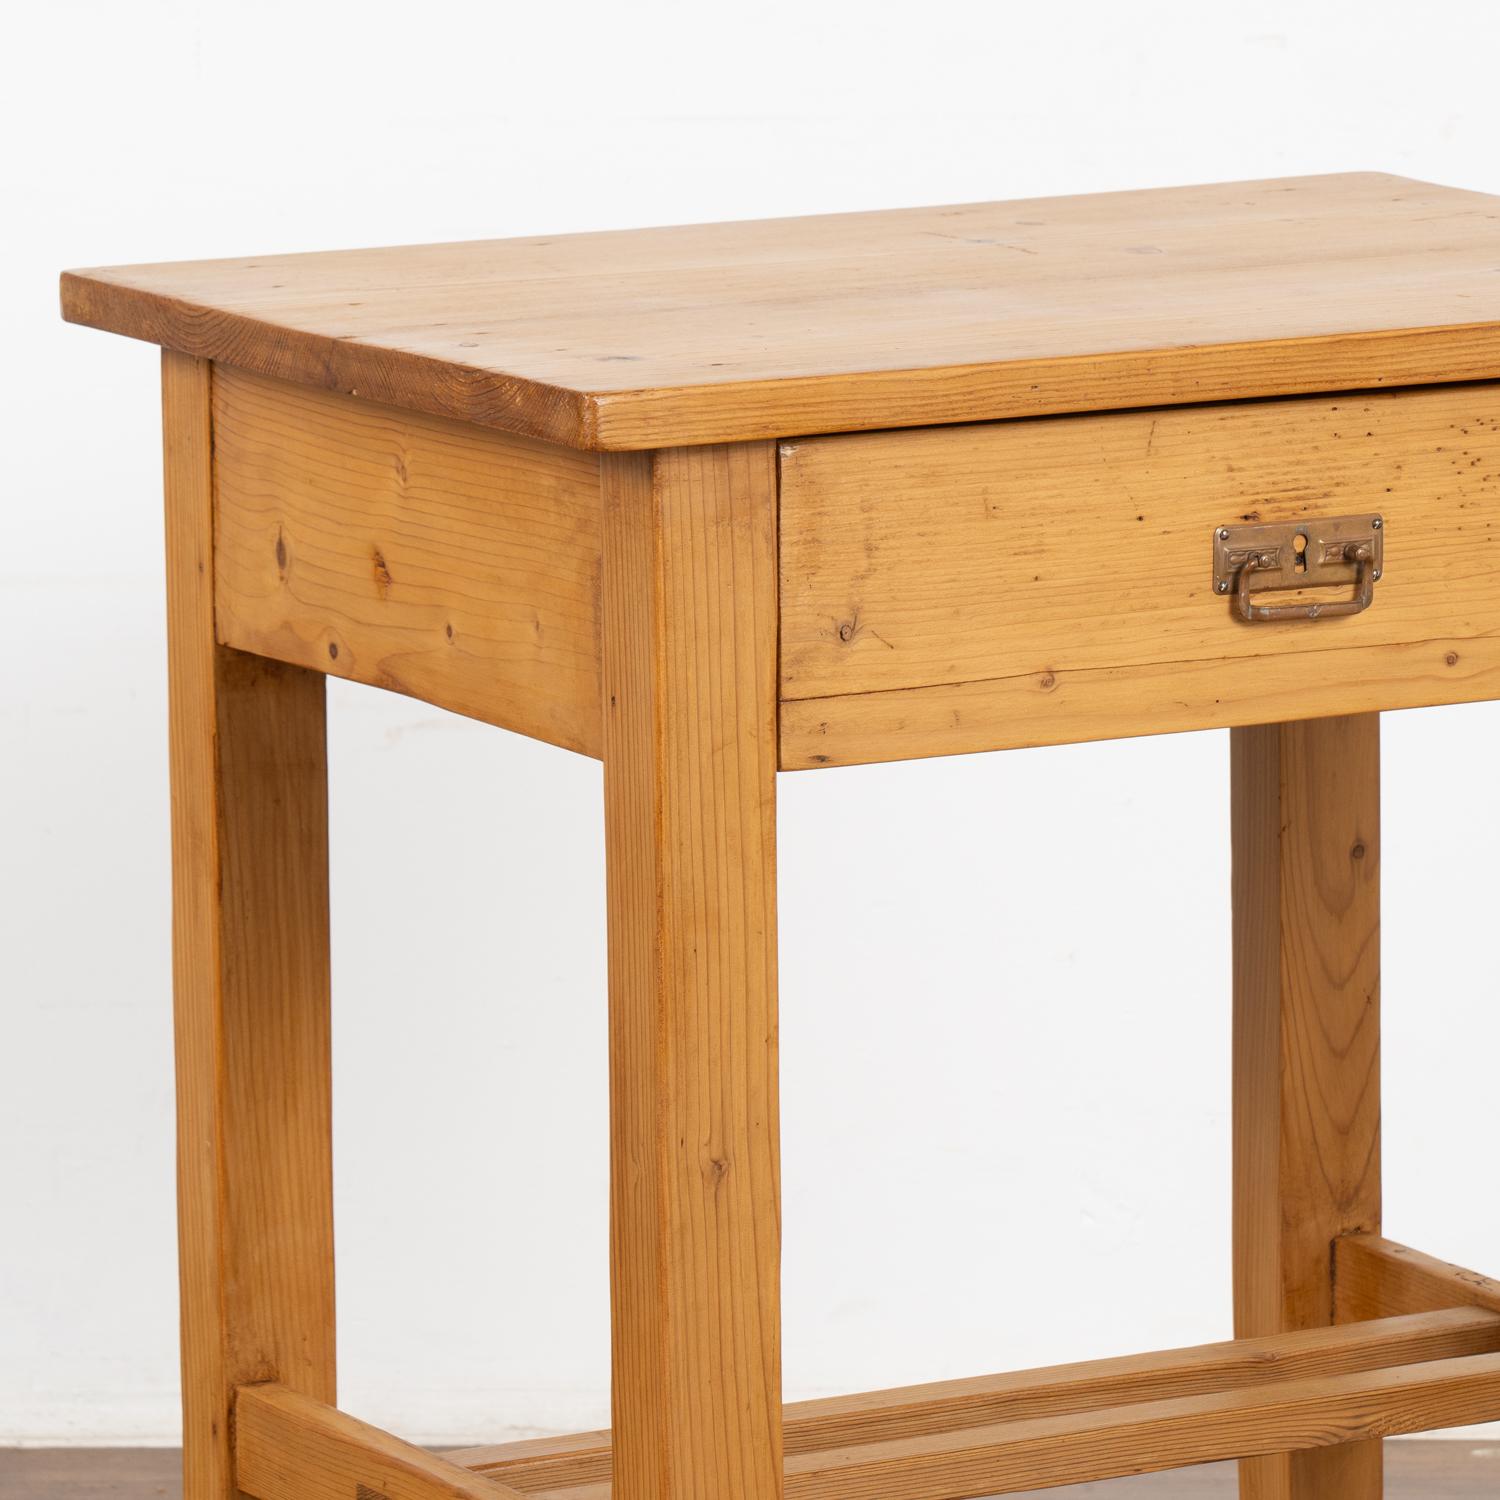 20th Century Small Pine Nightstand Side Table, Denmark circa 1900 For Sale